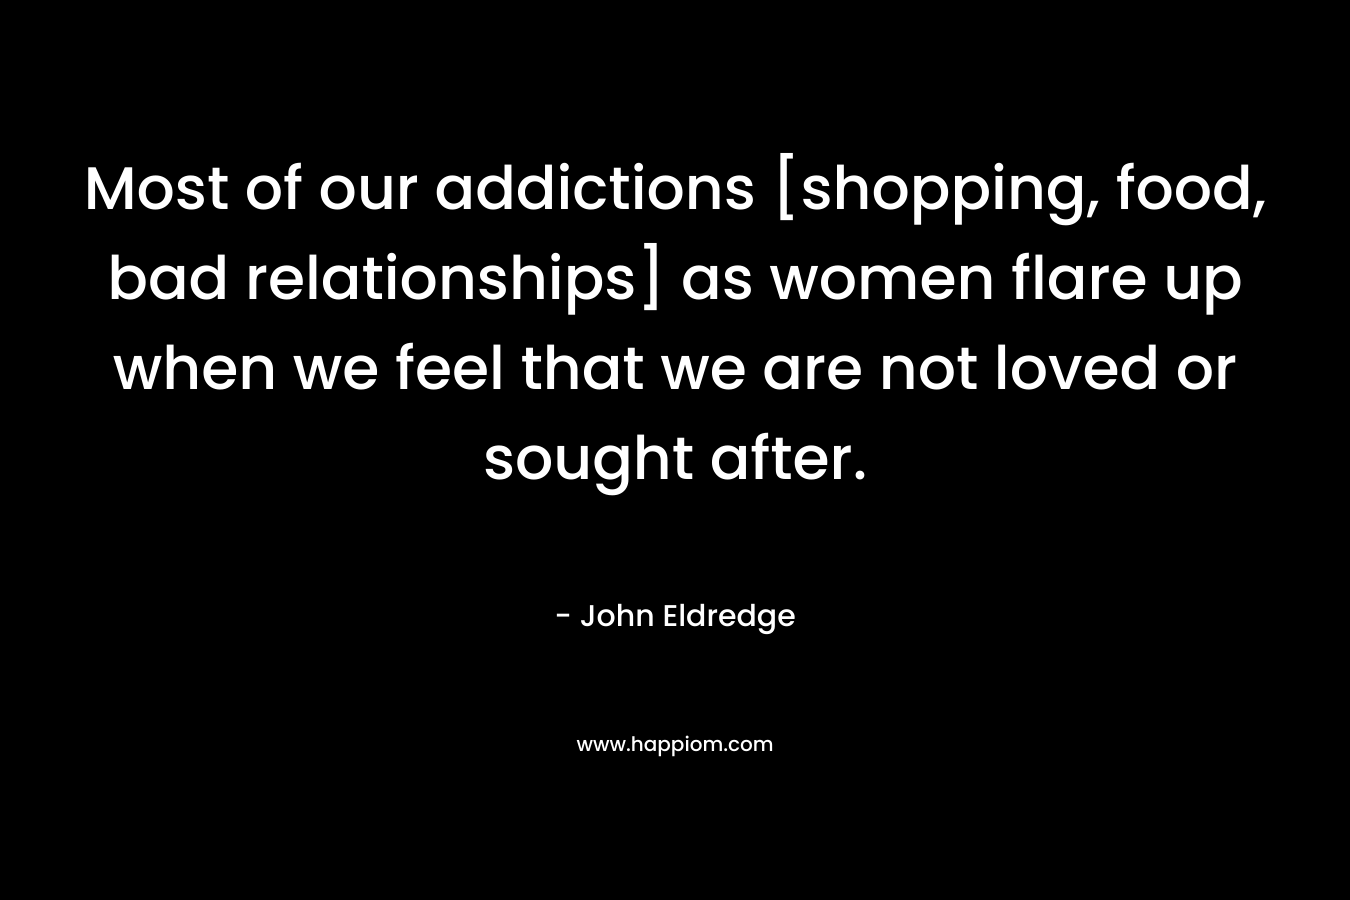 Most of our addictions [shopping, food, bad relationships] as women flare up when we feel that we are not loved or sought after. – John Eldredge